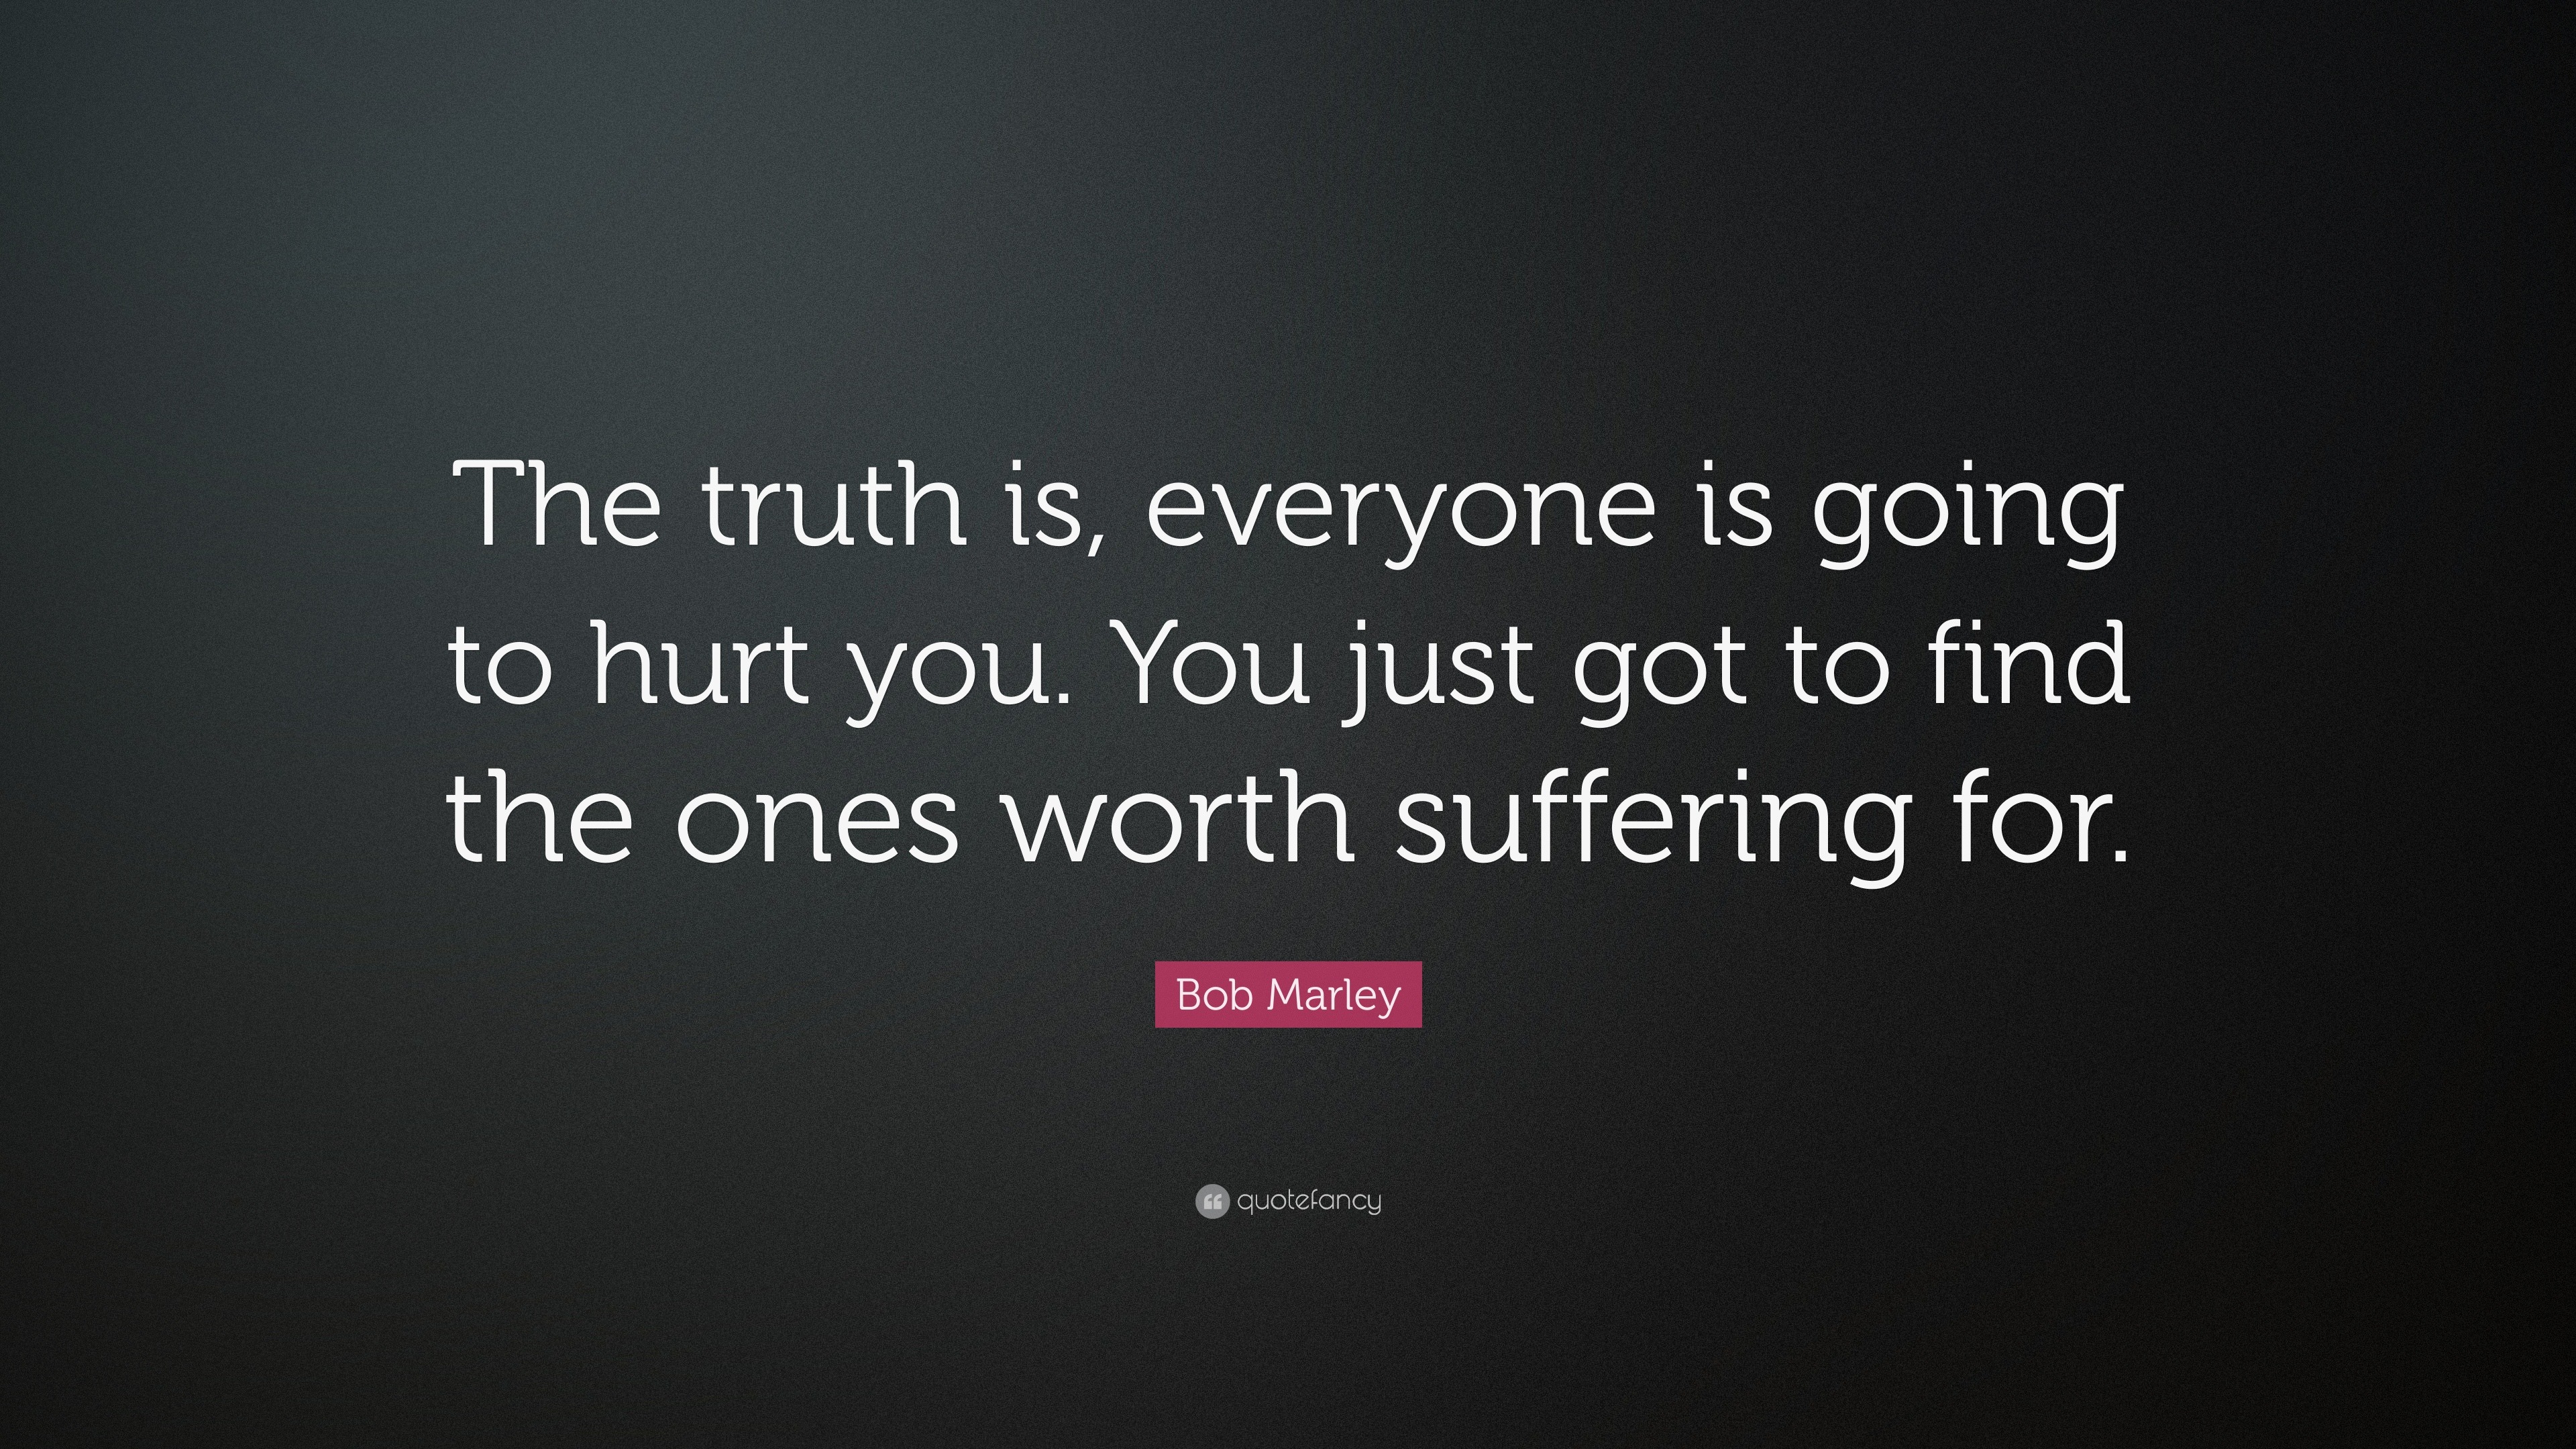 Bob Marley Quote: "The truth is, everyone is going to hurt ...